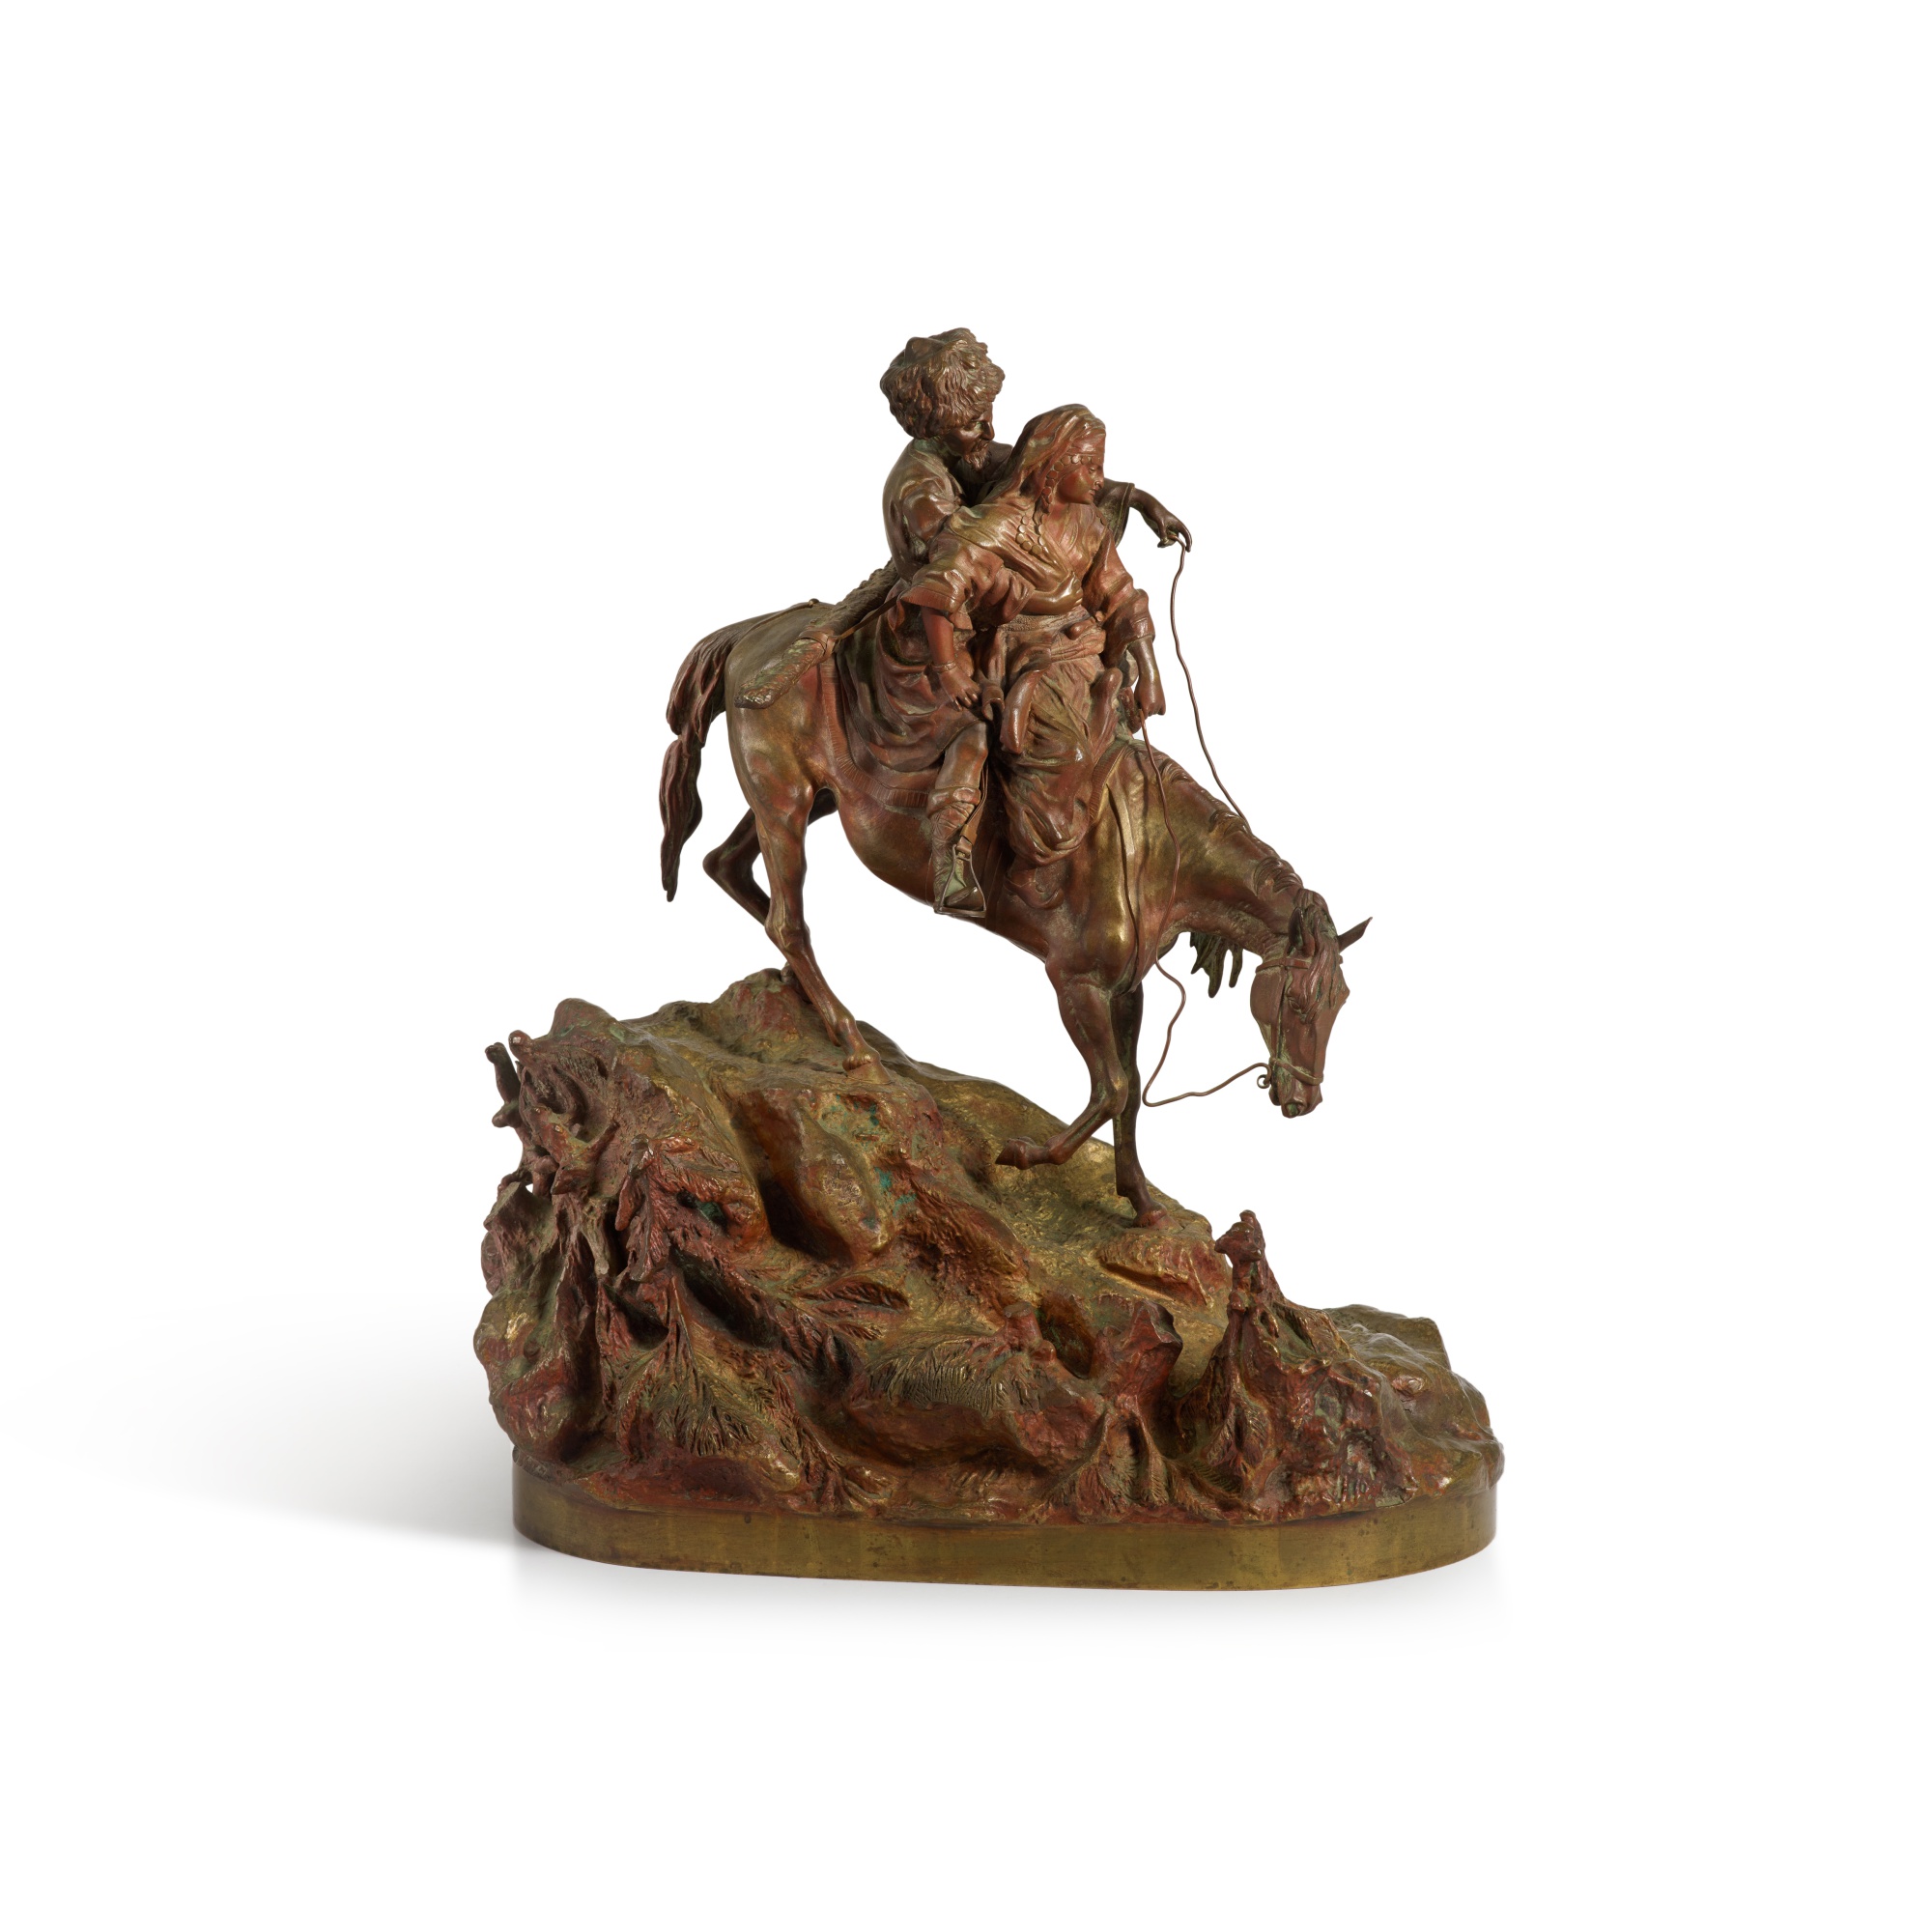 A Cossack and his Sweetheart: a bronze figural sculpture, cast by Woerffel, Grachev, St Petersburg, 